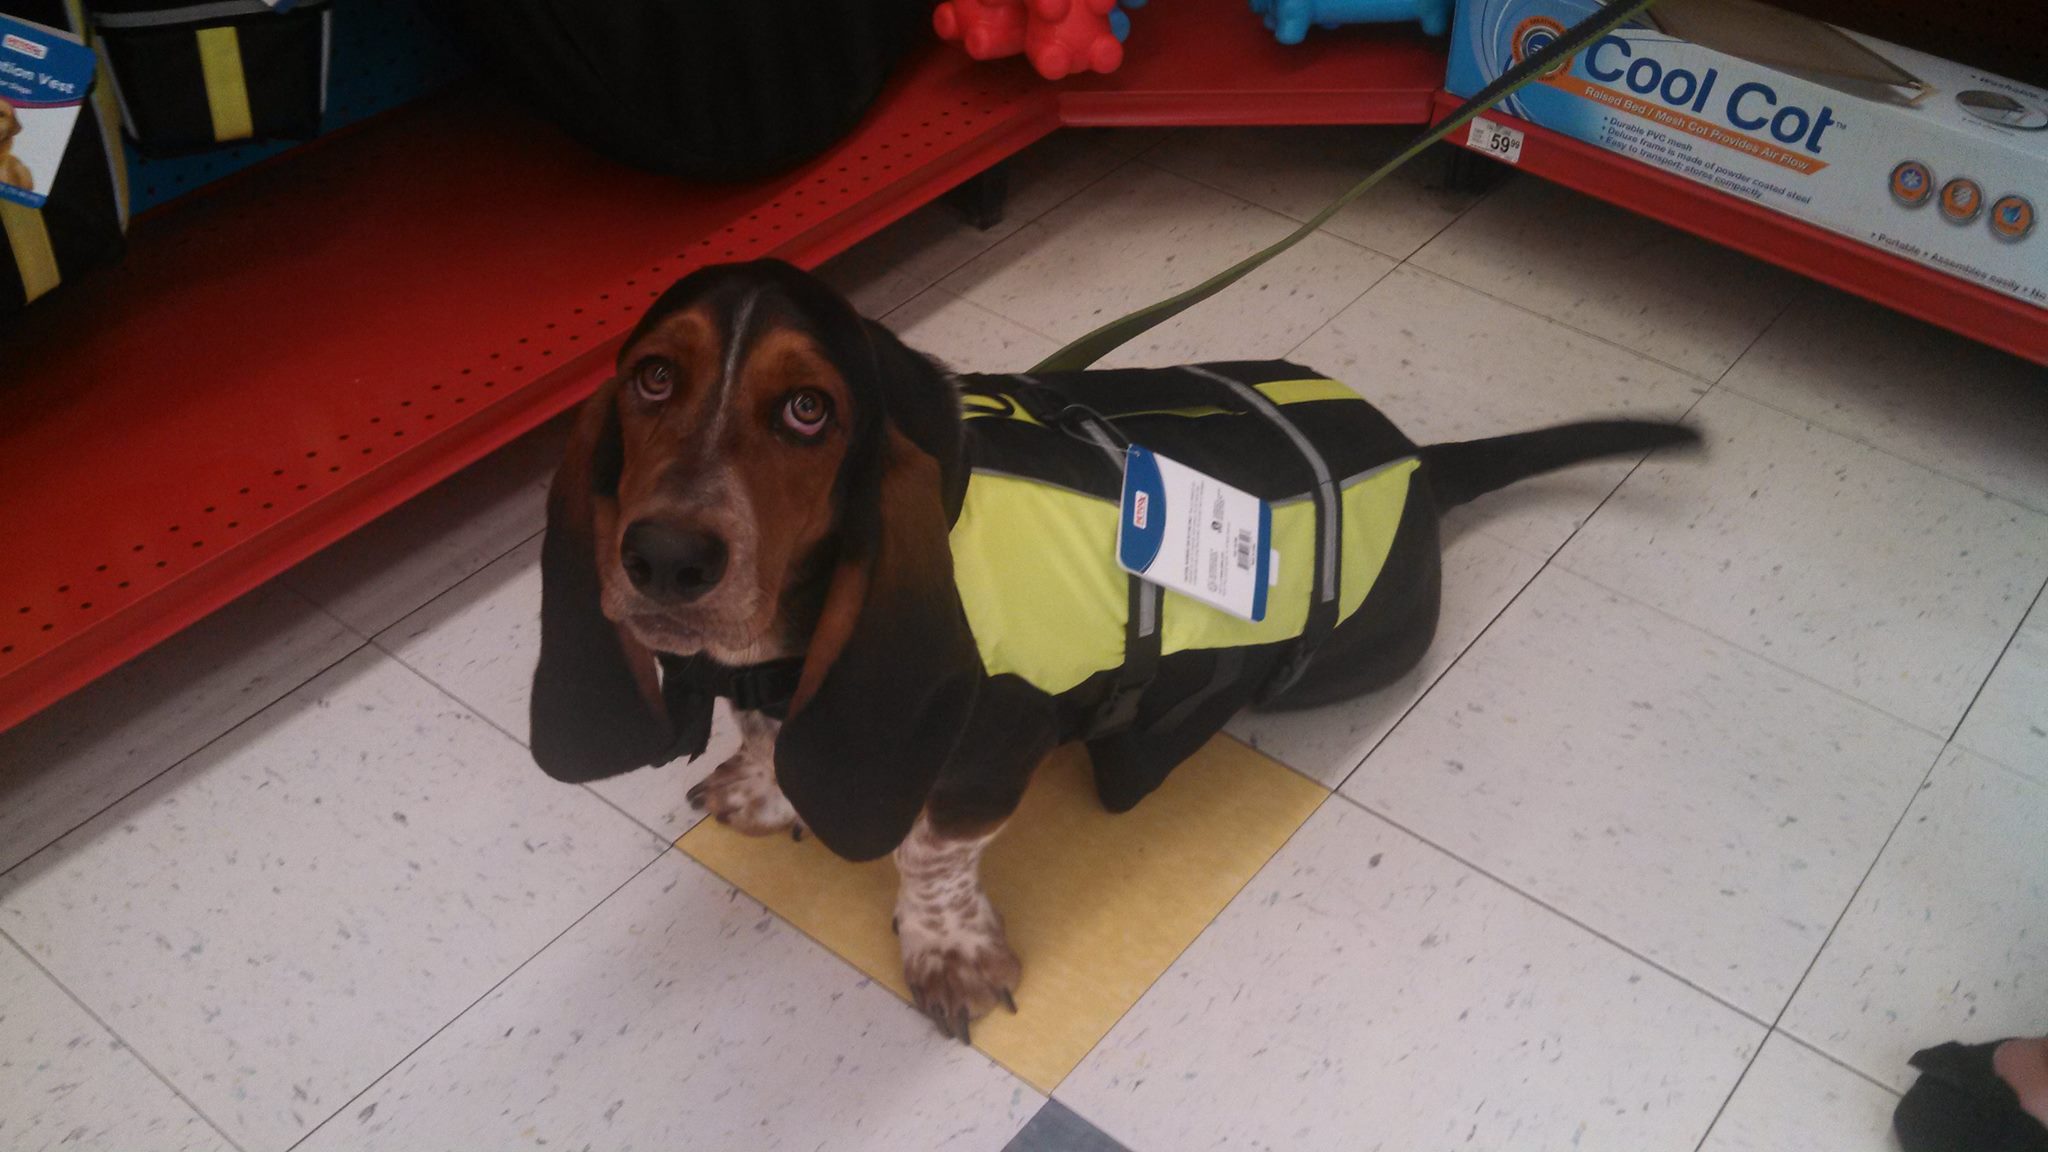 A Basset Hound wearing a safety vest while sitting on the floor